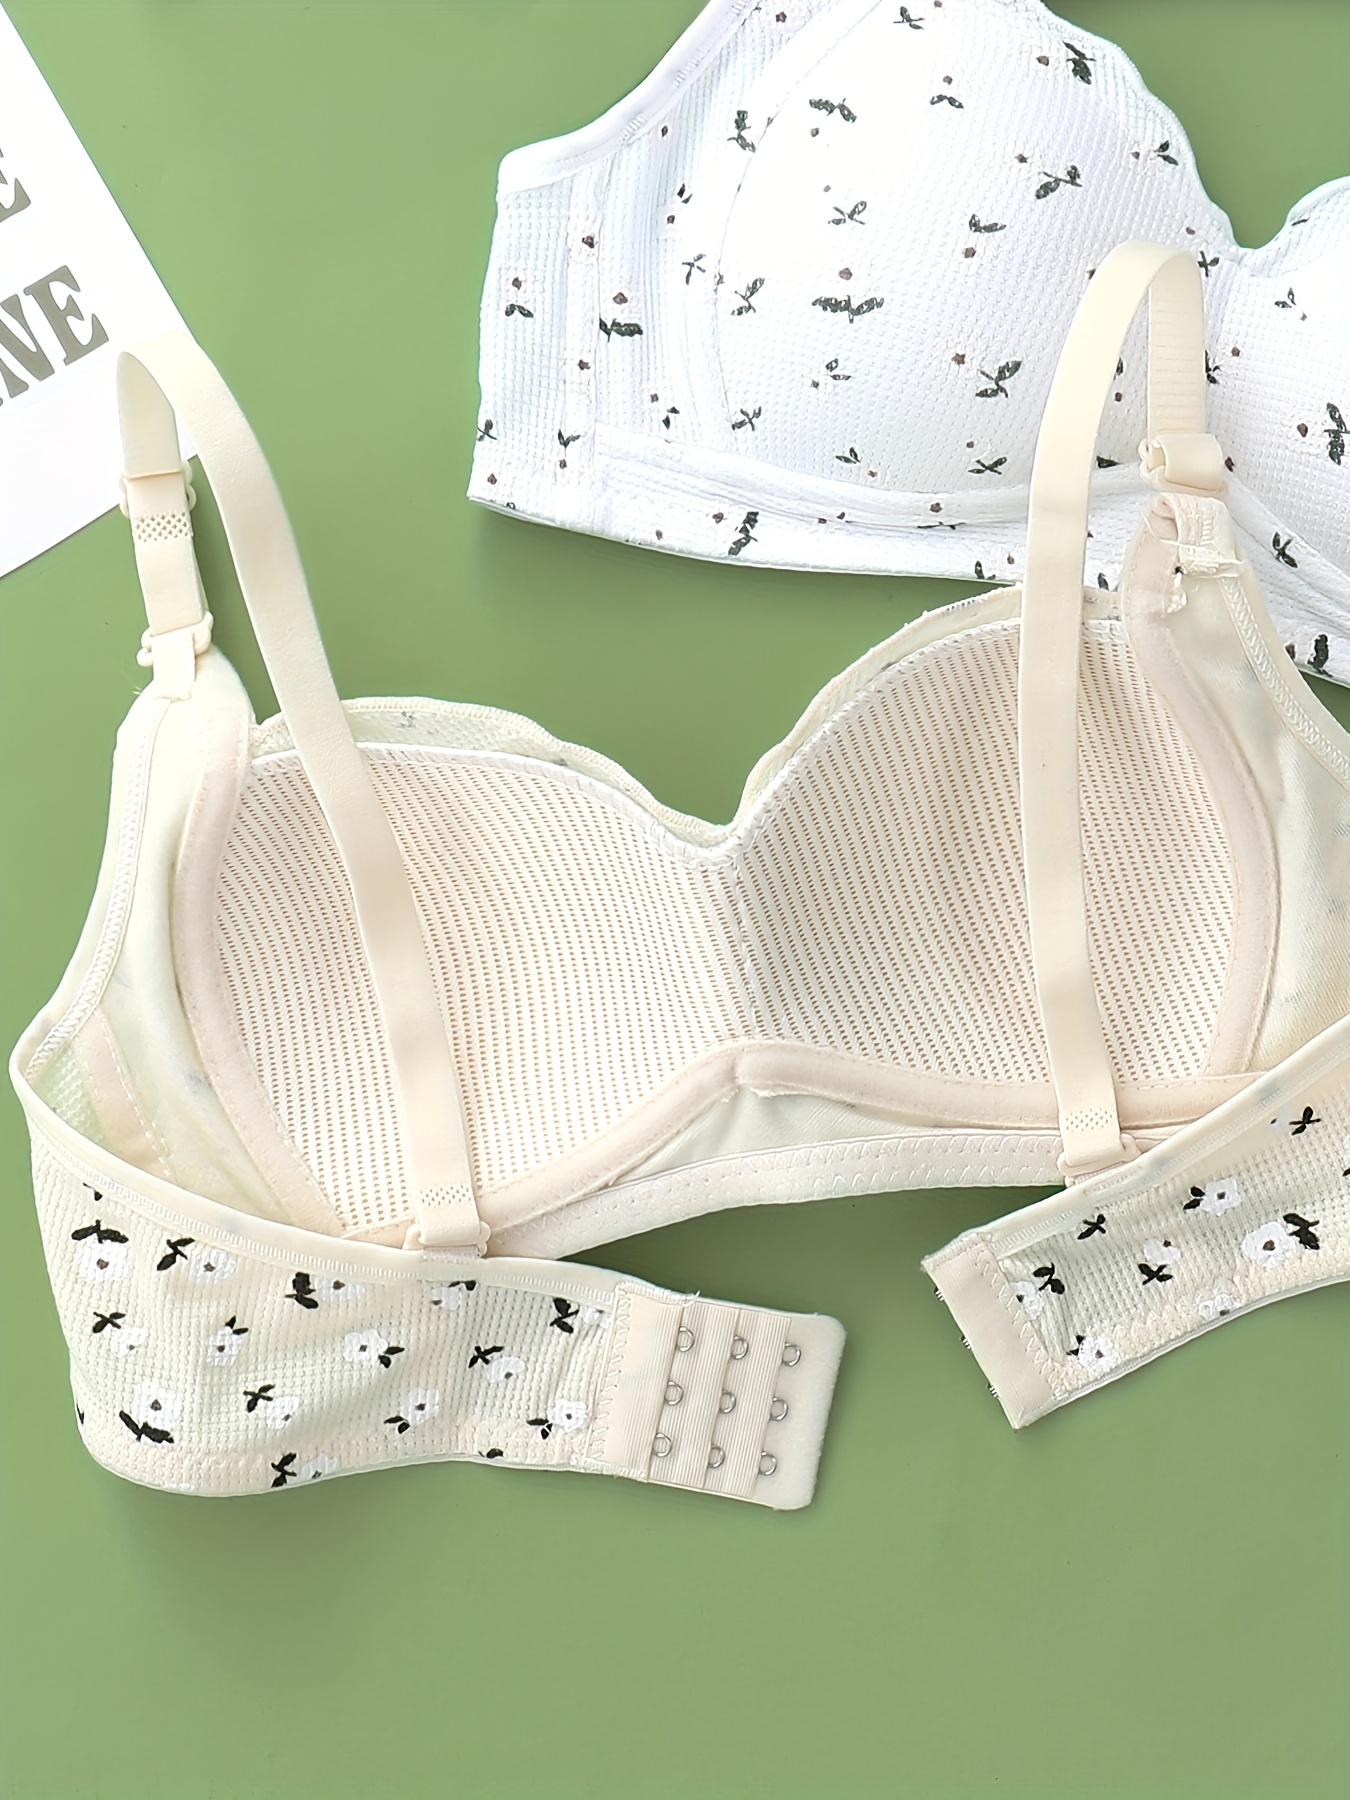 Pure Cotton Girls Bra Thin, Adjustable, And Comfortable Knix Underwear Bras  For Students, Youth, Breastfeeding No Steel Ring Required From Elroyelissa,  $18.63